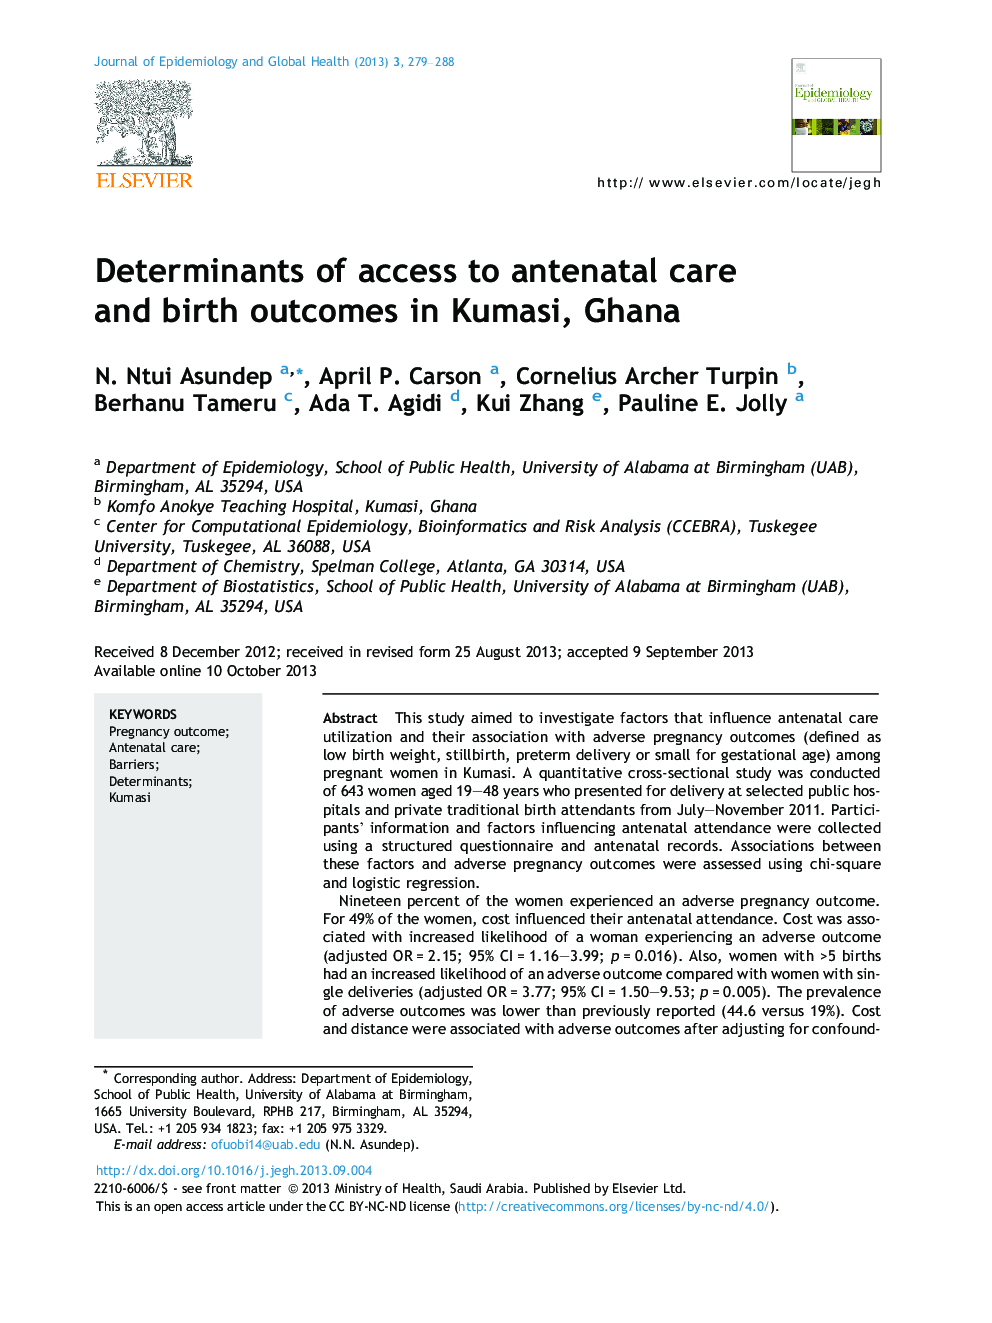 Determinants of access to antenatal care and birth outcomes in Kumasi, Ghana